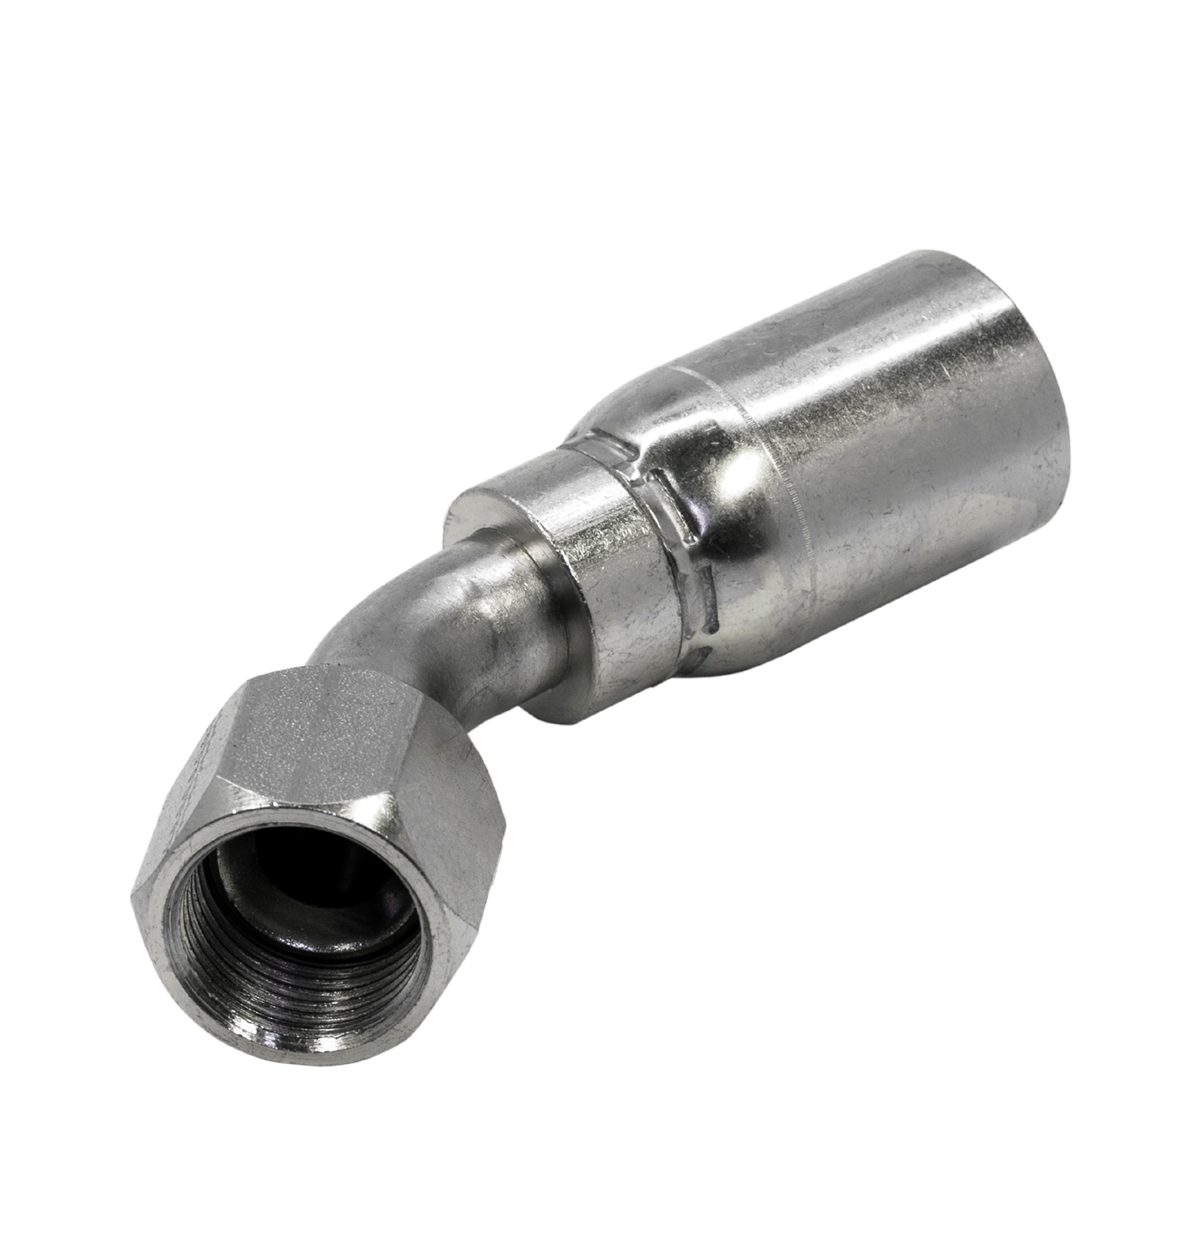 Purchase hydraulic fittings online